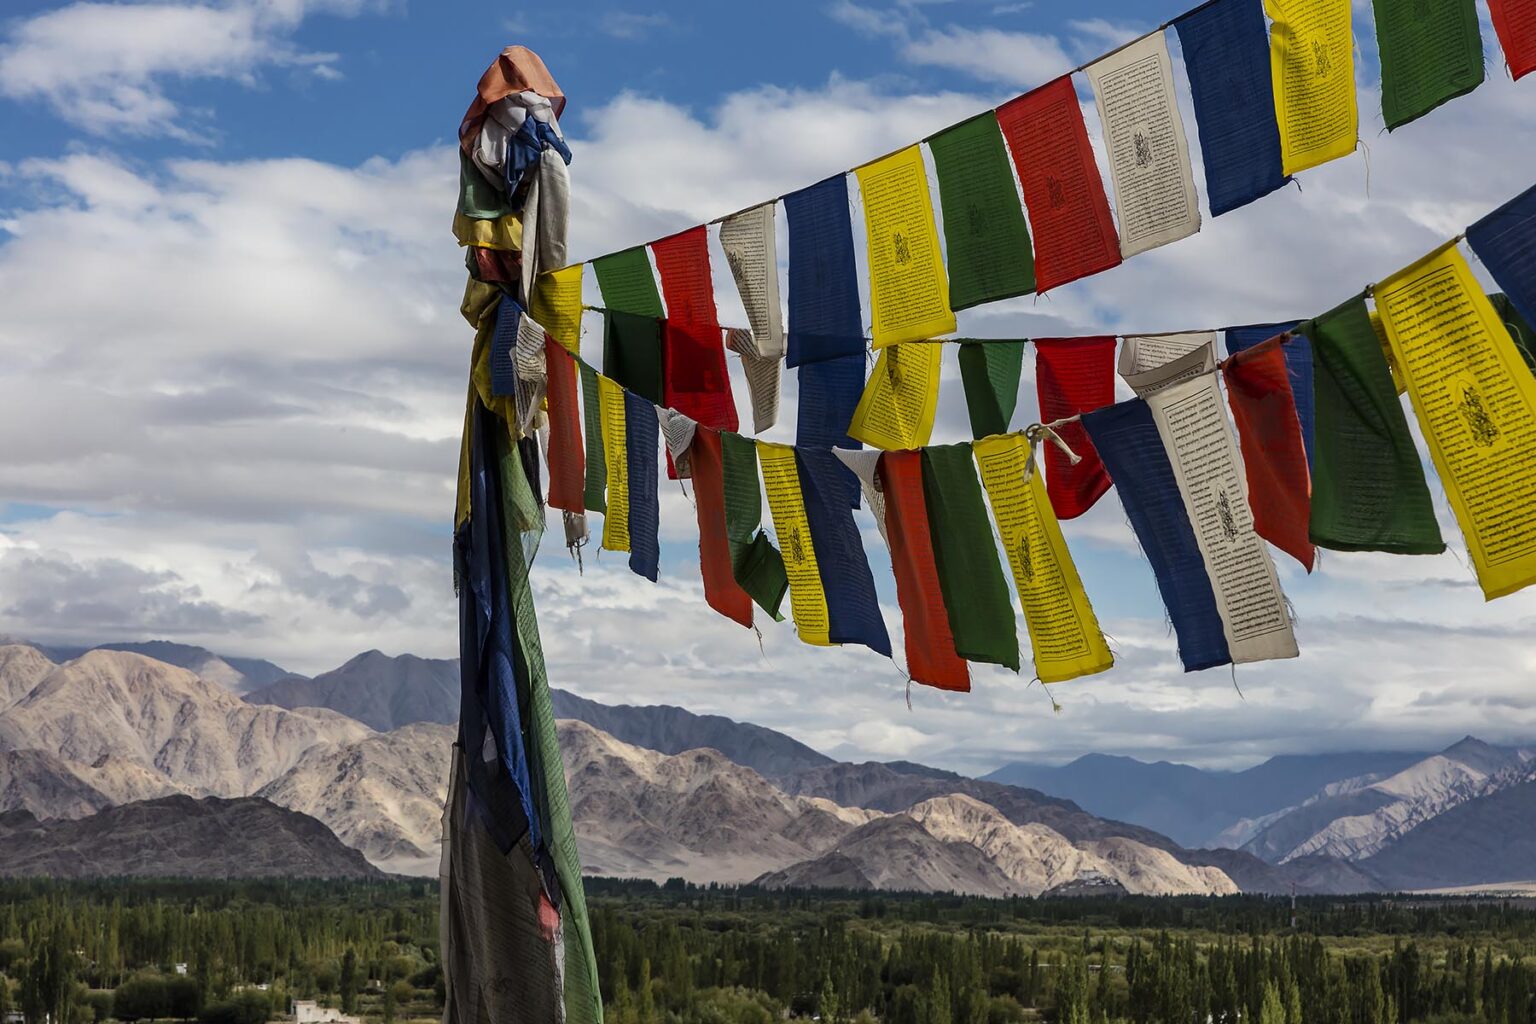 A view of the LEH VALLEY with prayer flags from SHEY GOMPA - LEH VALLEY, LADAKH